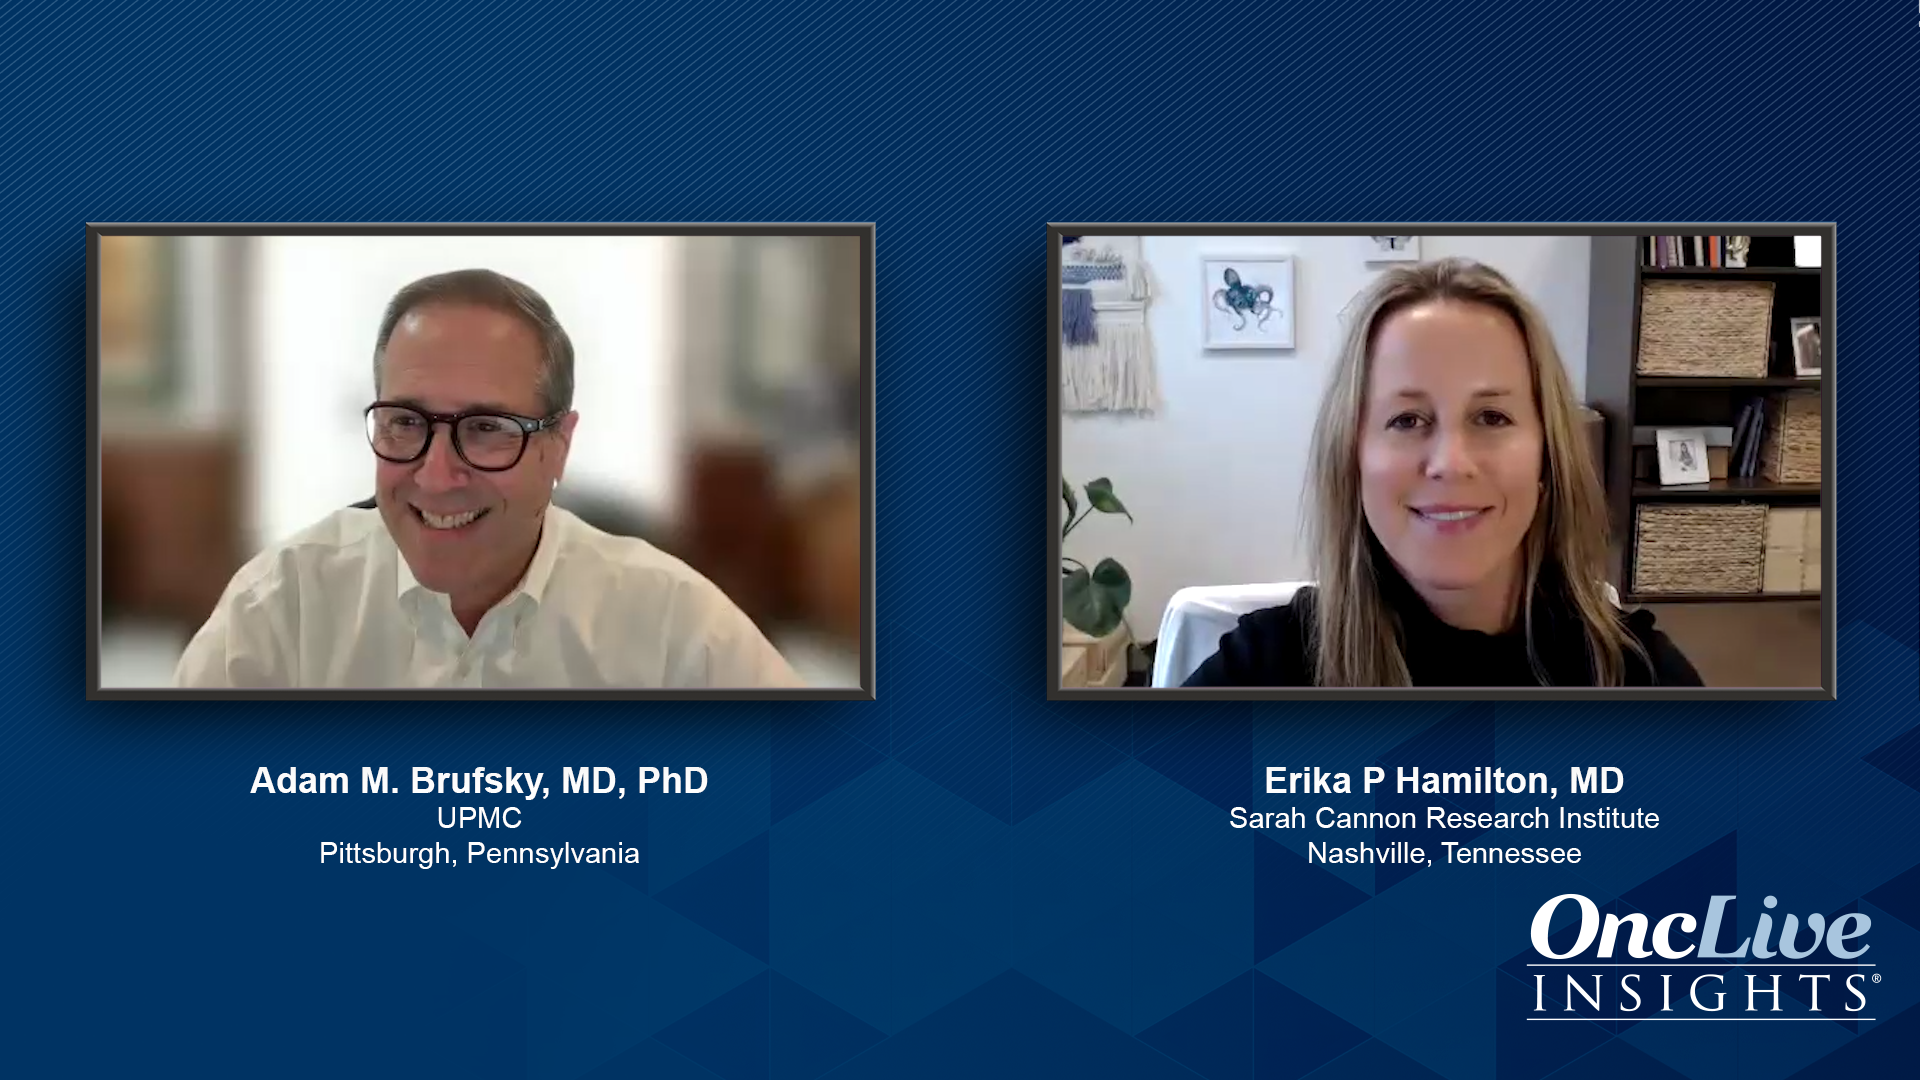 OncLive -2 KOLs featured in "Targeting the PI3K/AKT/PTEN Pathway in HR+/HER2- Locally Advanced and Metastatic Breast Cancer"